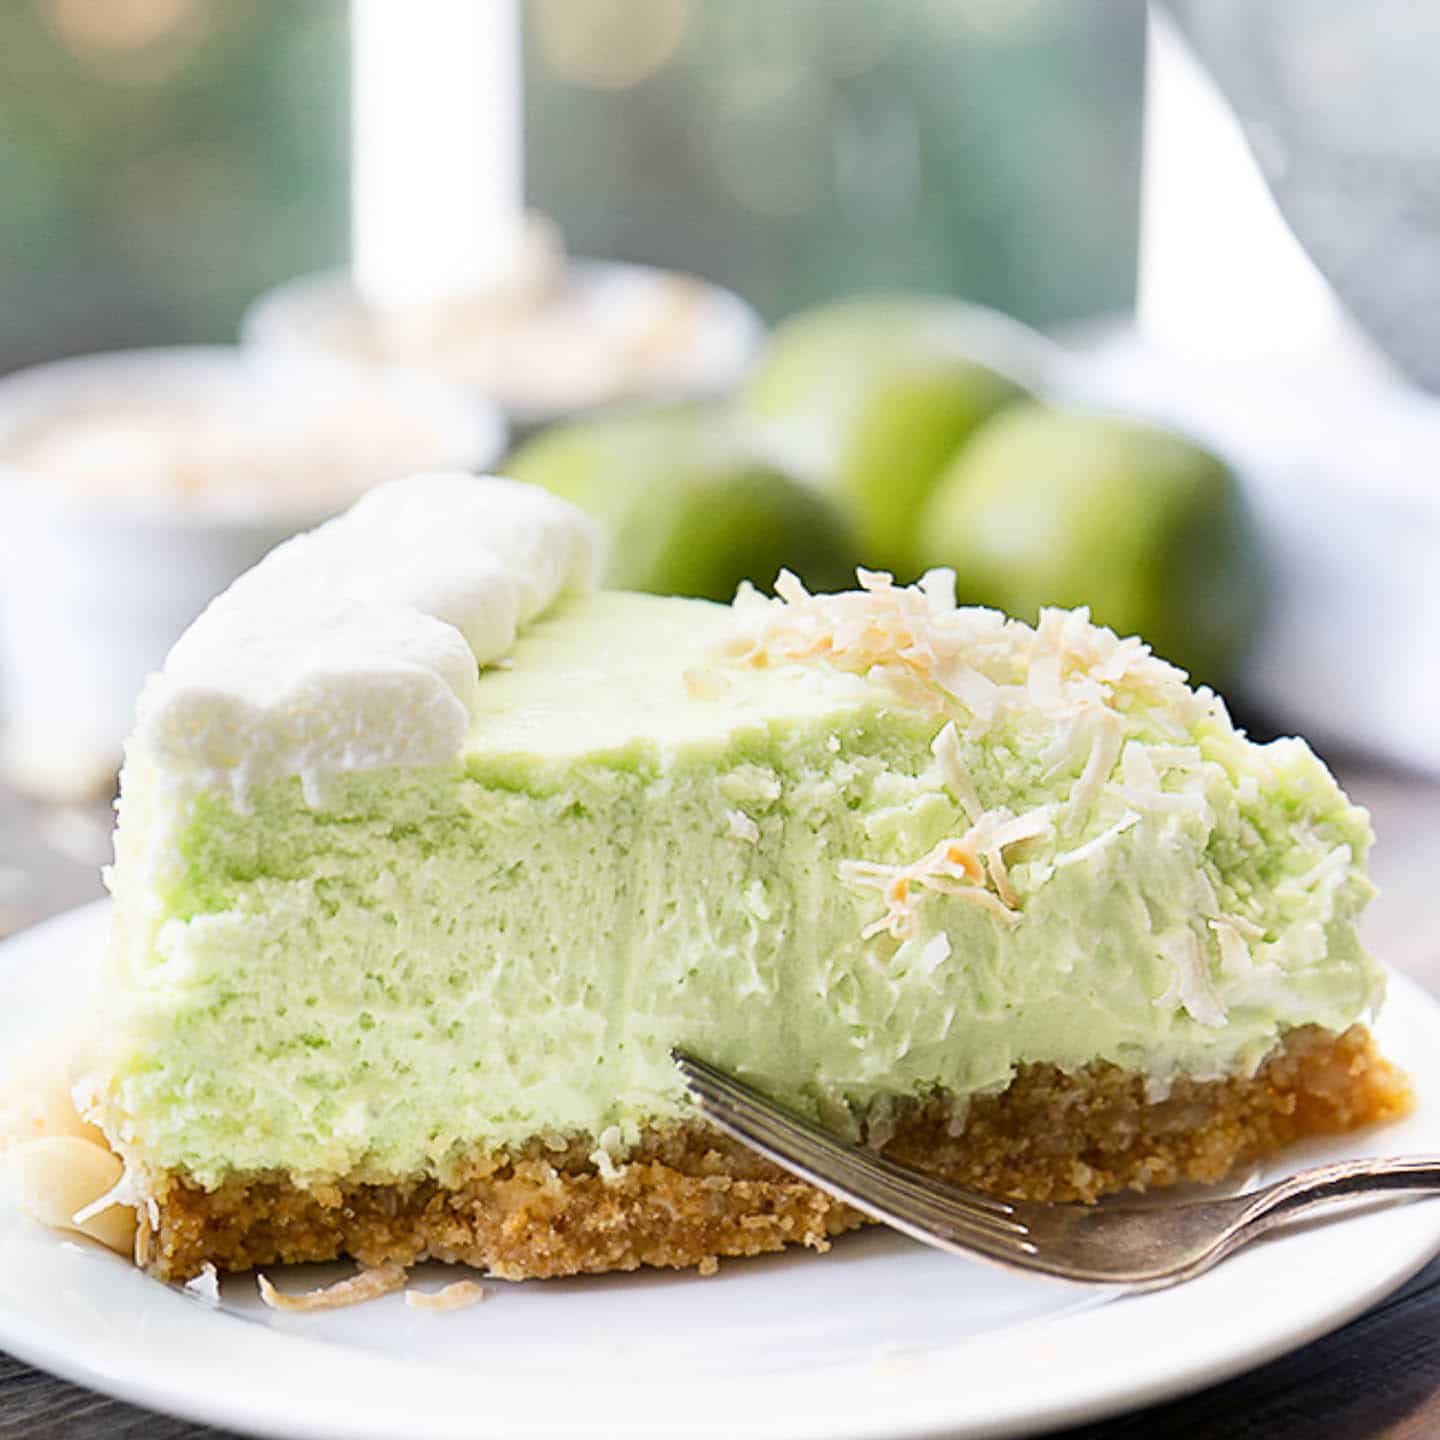 slice of key lime cheesecake on a plate